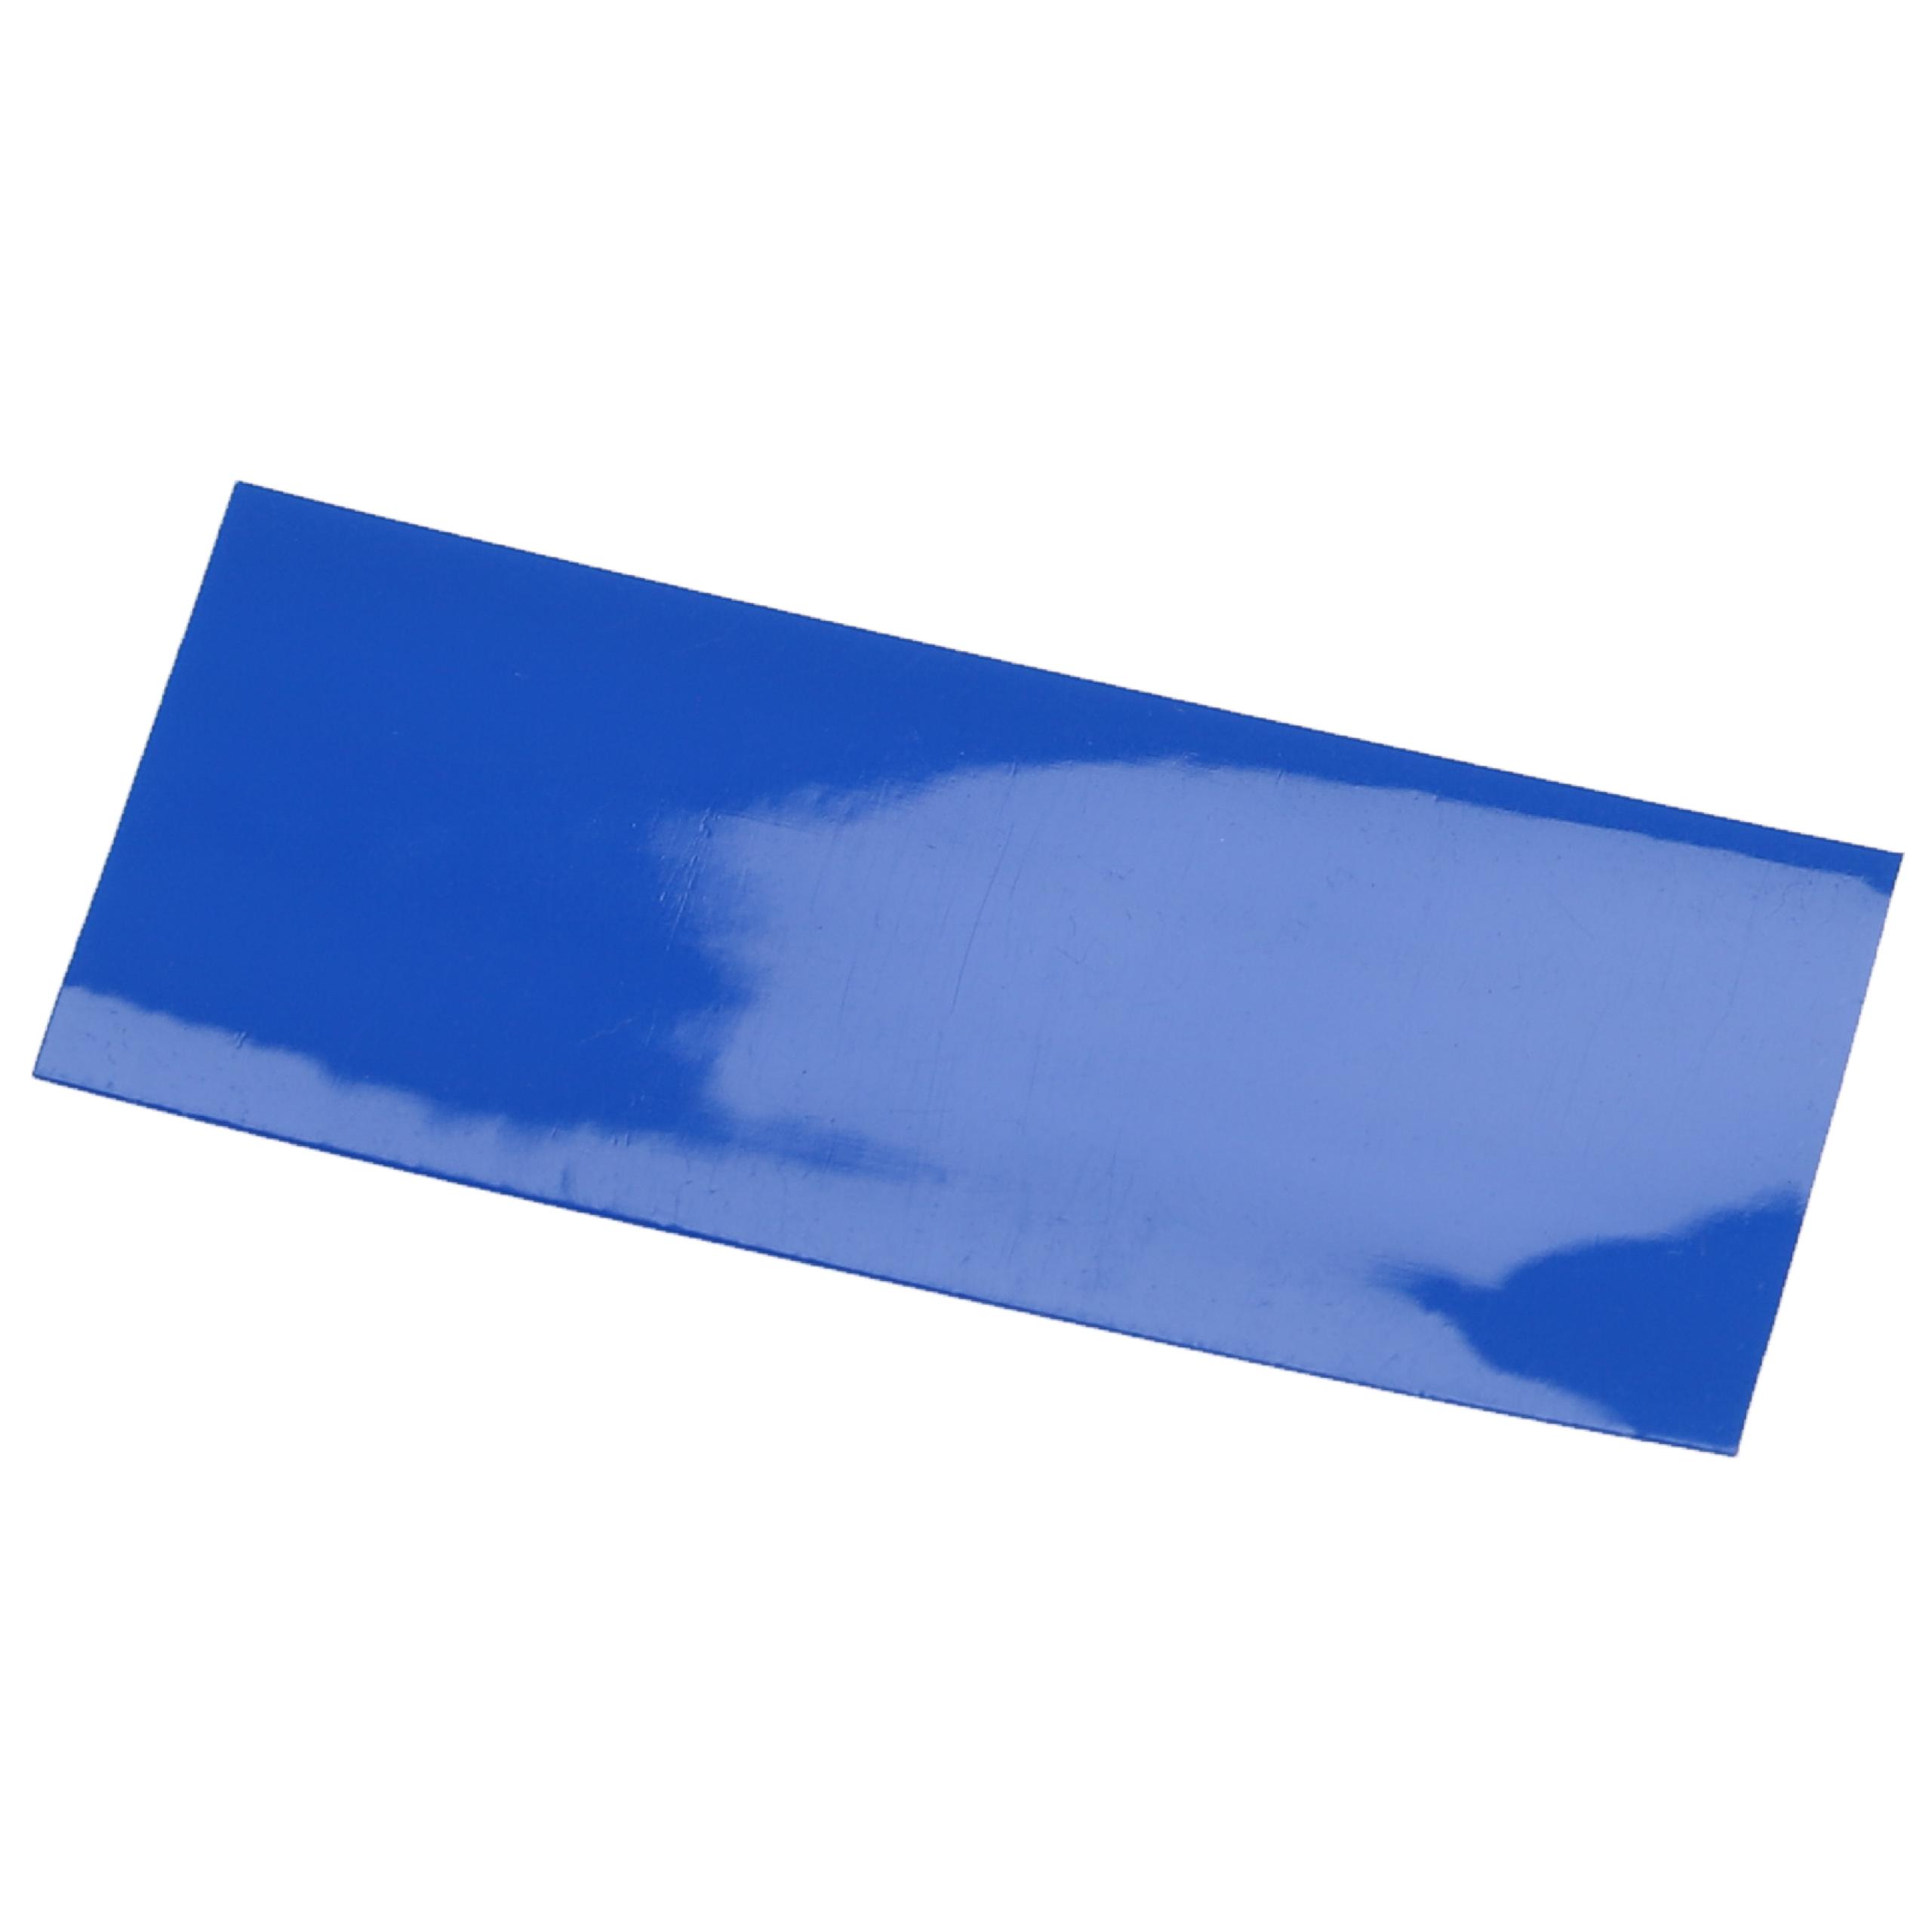 10x Heat Shrink Tubing Suitable for 18650 Battery Cells - Shrink Wrap Blue